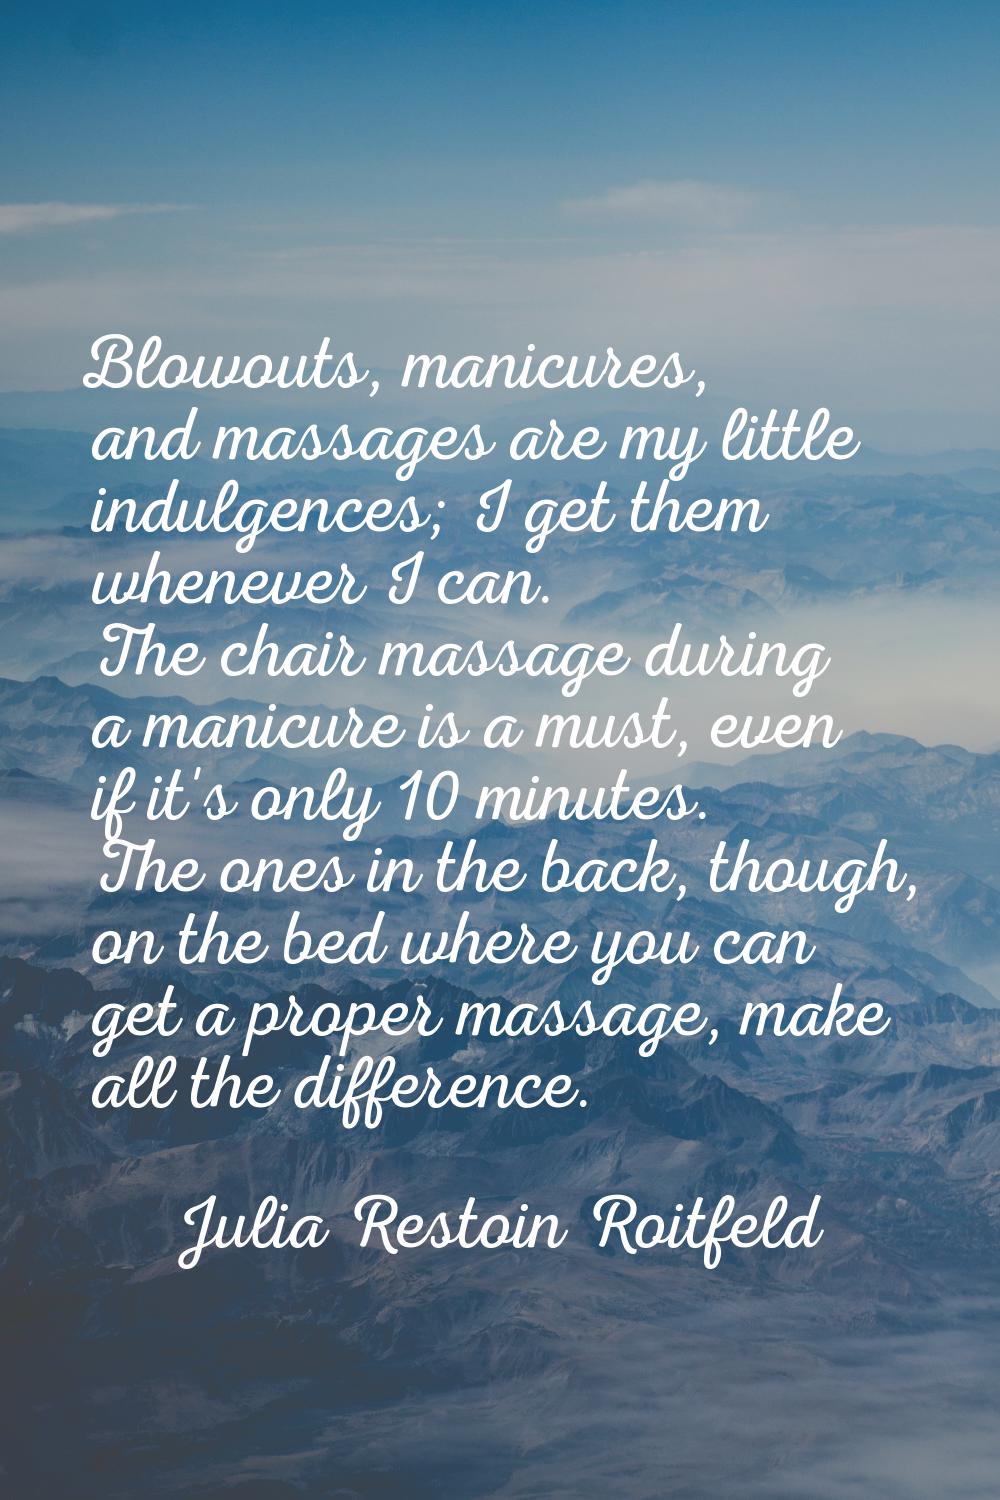 Blowouts, manicures, and massages are my little indulgences; I get them whenever I can. The chair m